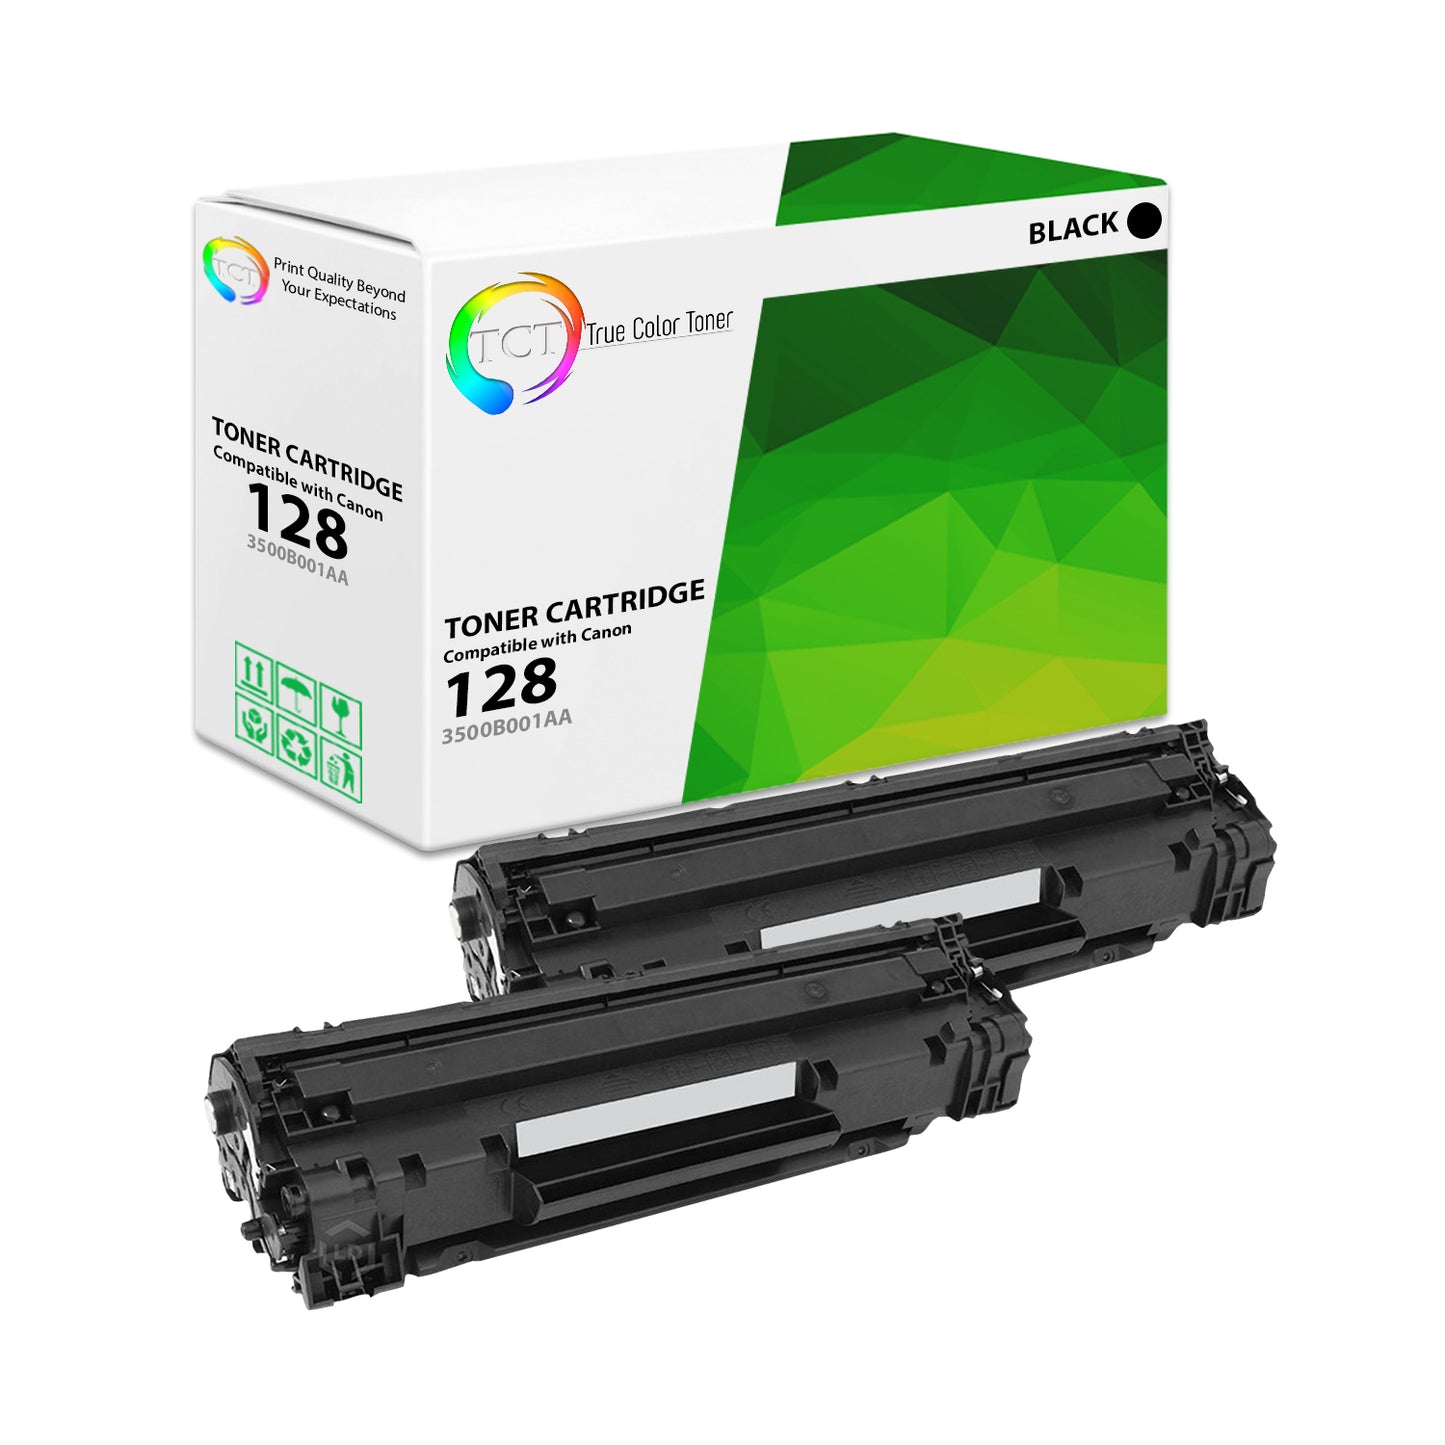 TCT Compatible Toner Cartridge Replacement for the Canon 128 Series - 2 Pack Black